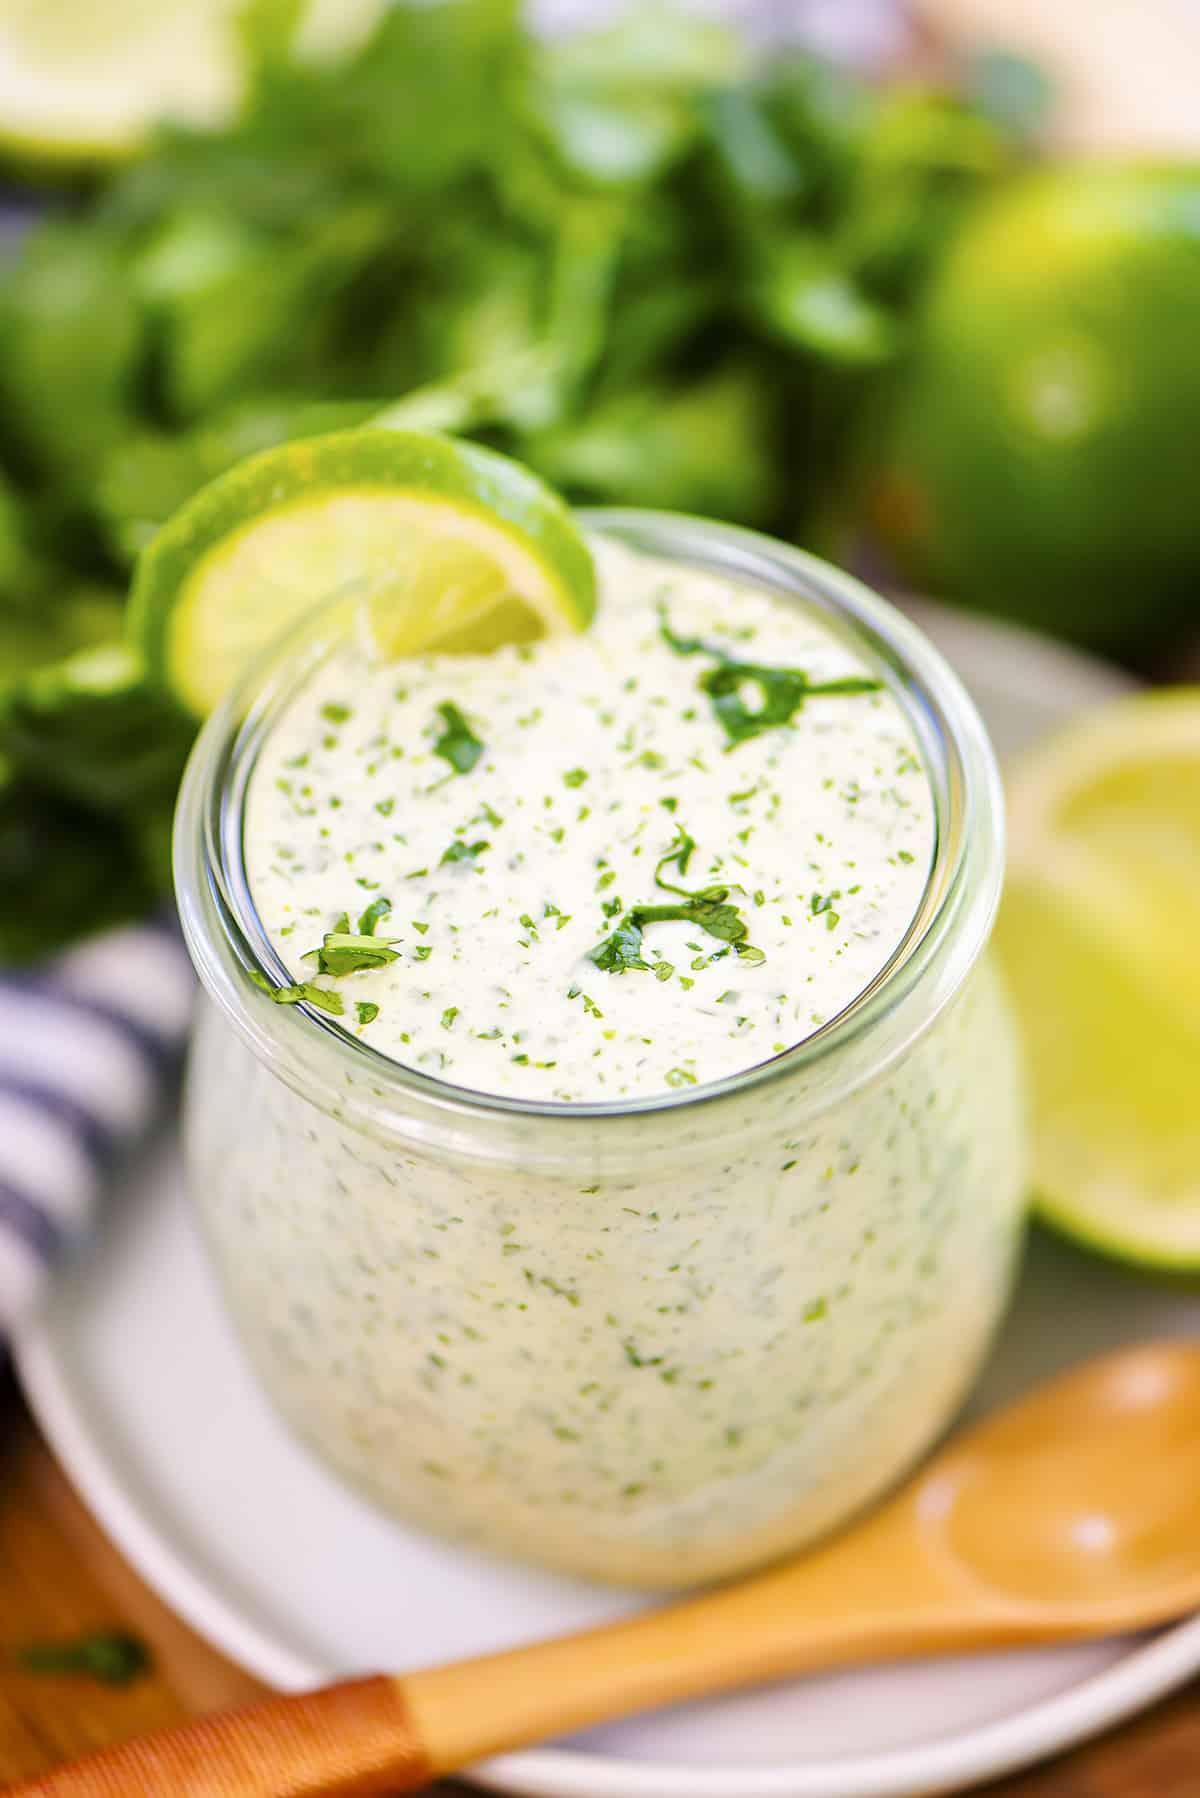 Cilantro lime salad dressing in small jar.